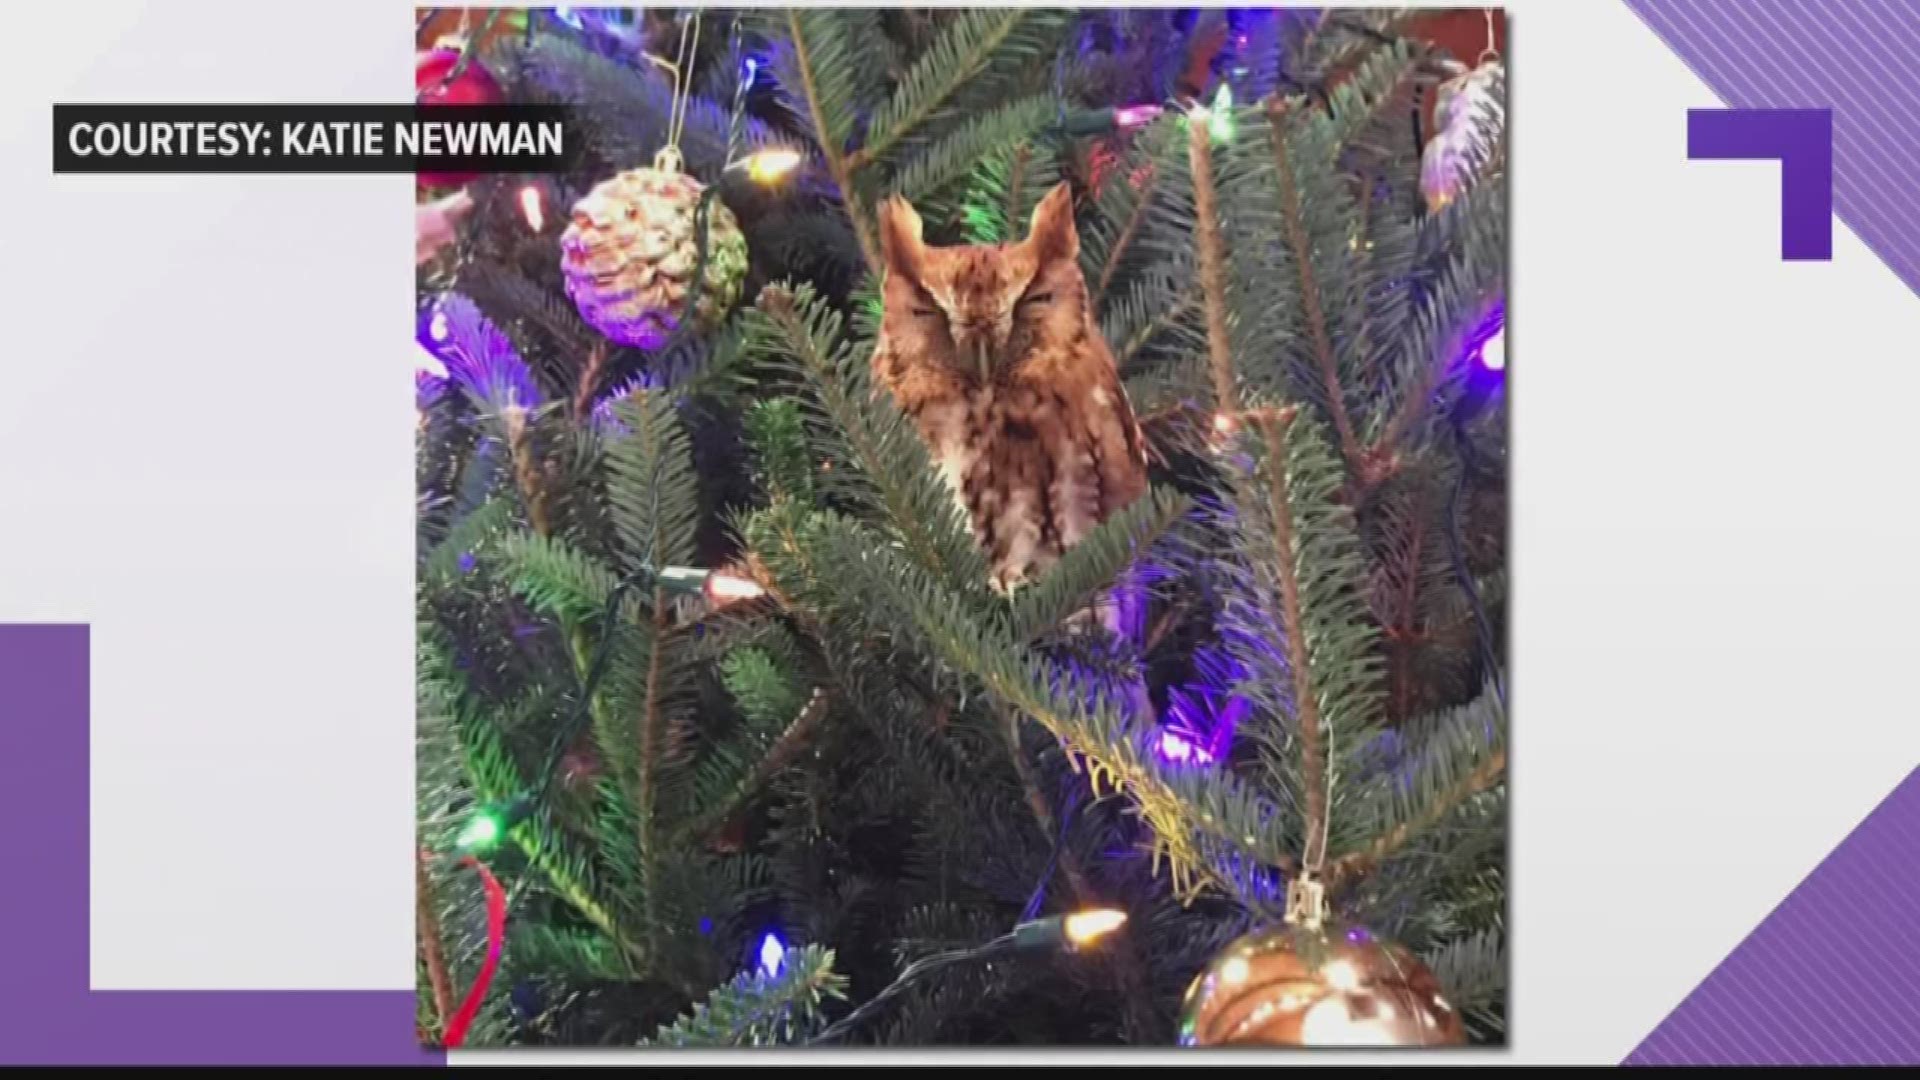 The family thought the owl was an ornament until the little animal turned its head.